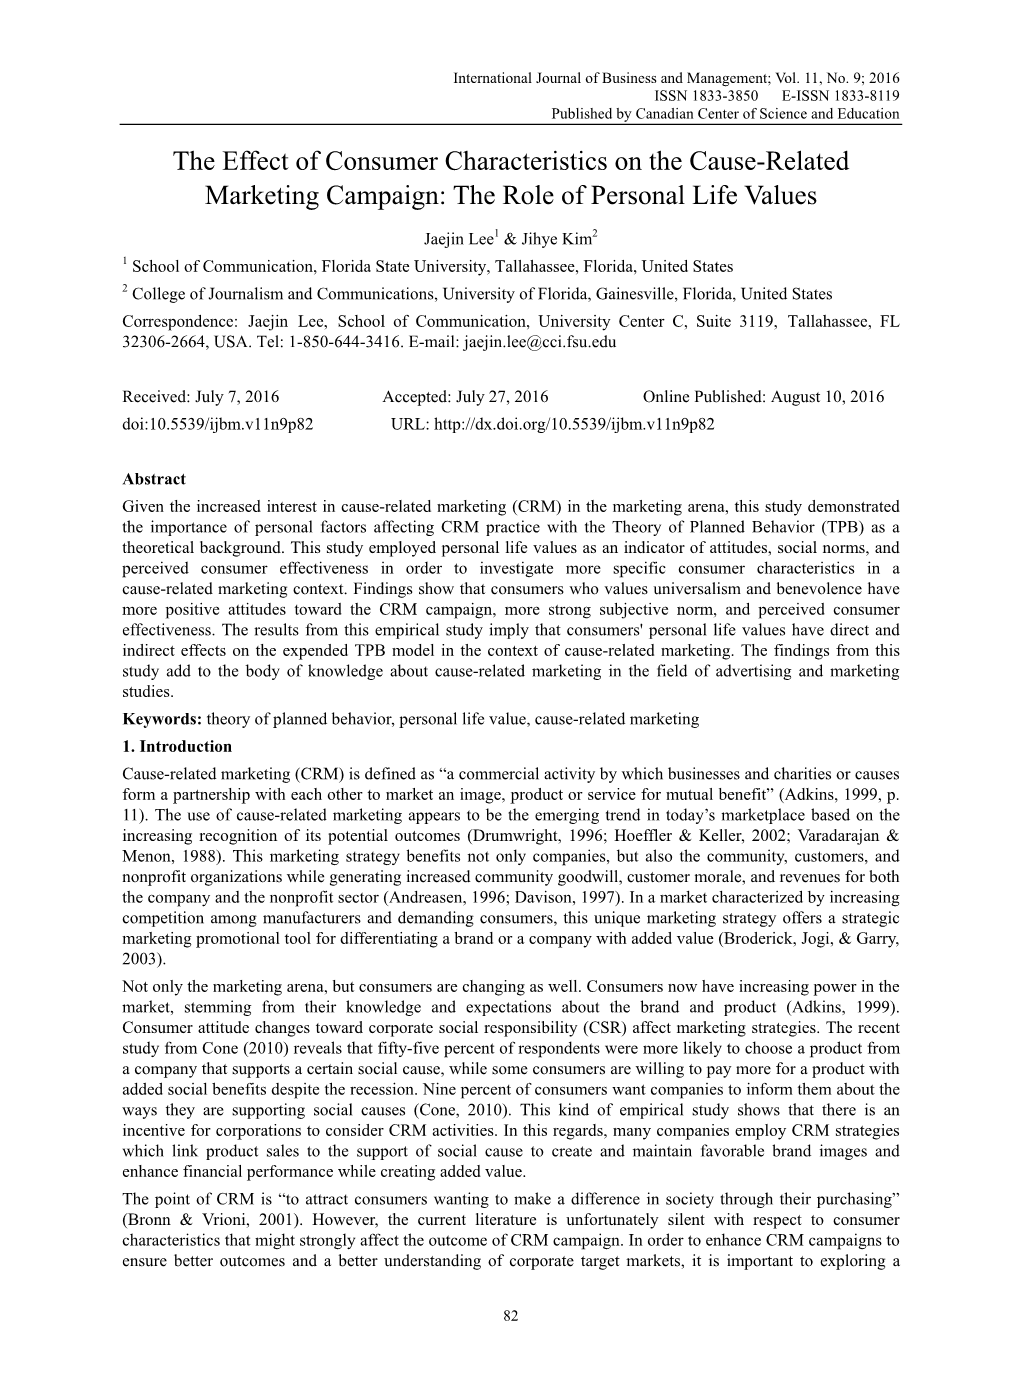 The Effect of Consumer Characteristics on the Cause-Related Marketing Campaign: the Role of Personal Life Values